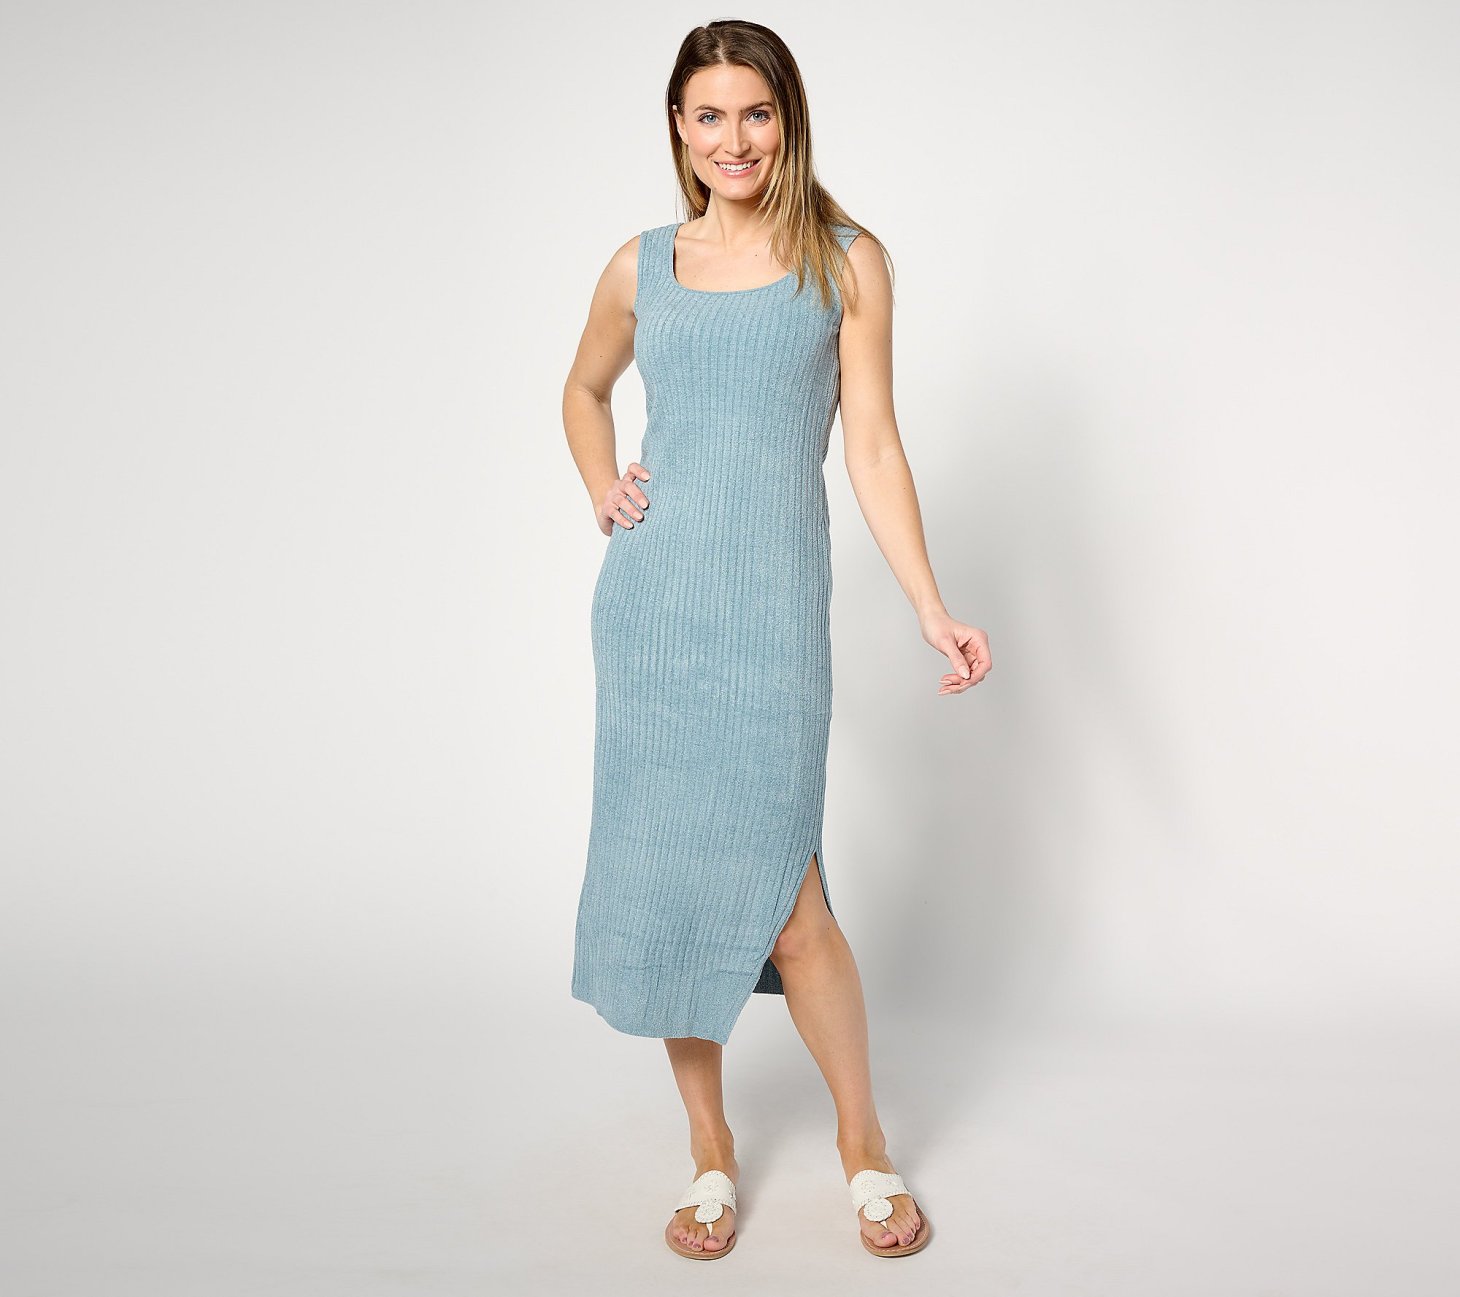 cozychic dress, one of barefoot dreams spring essentials